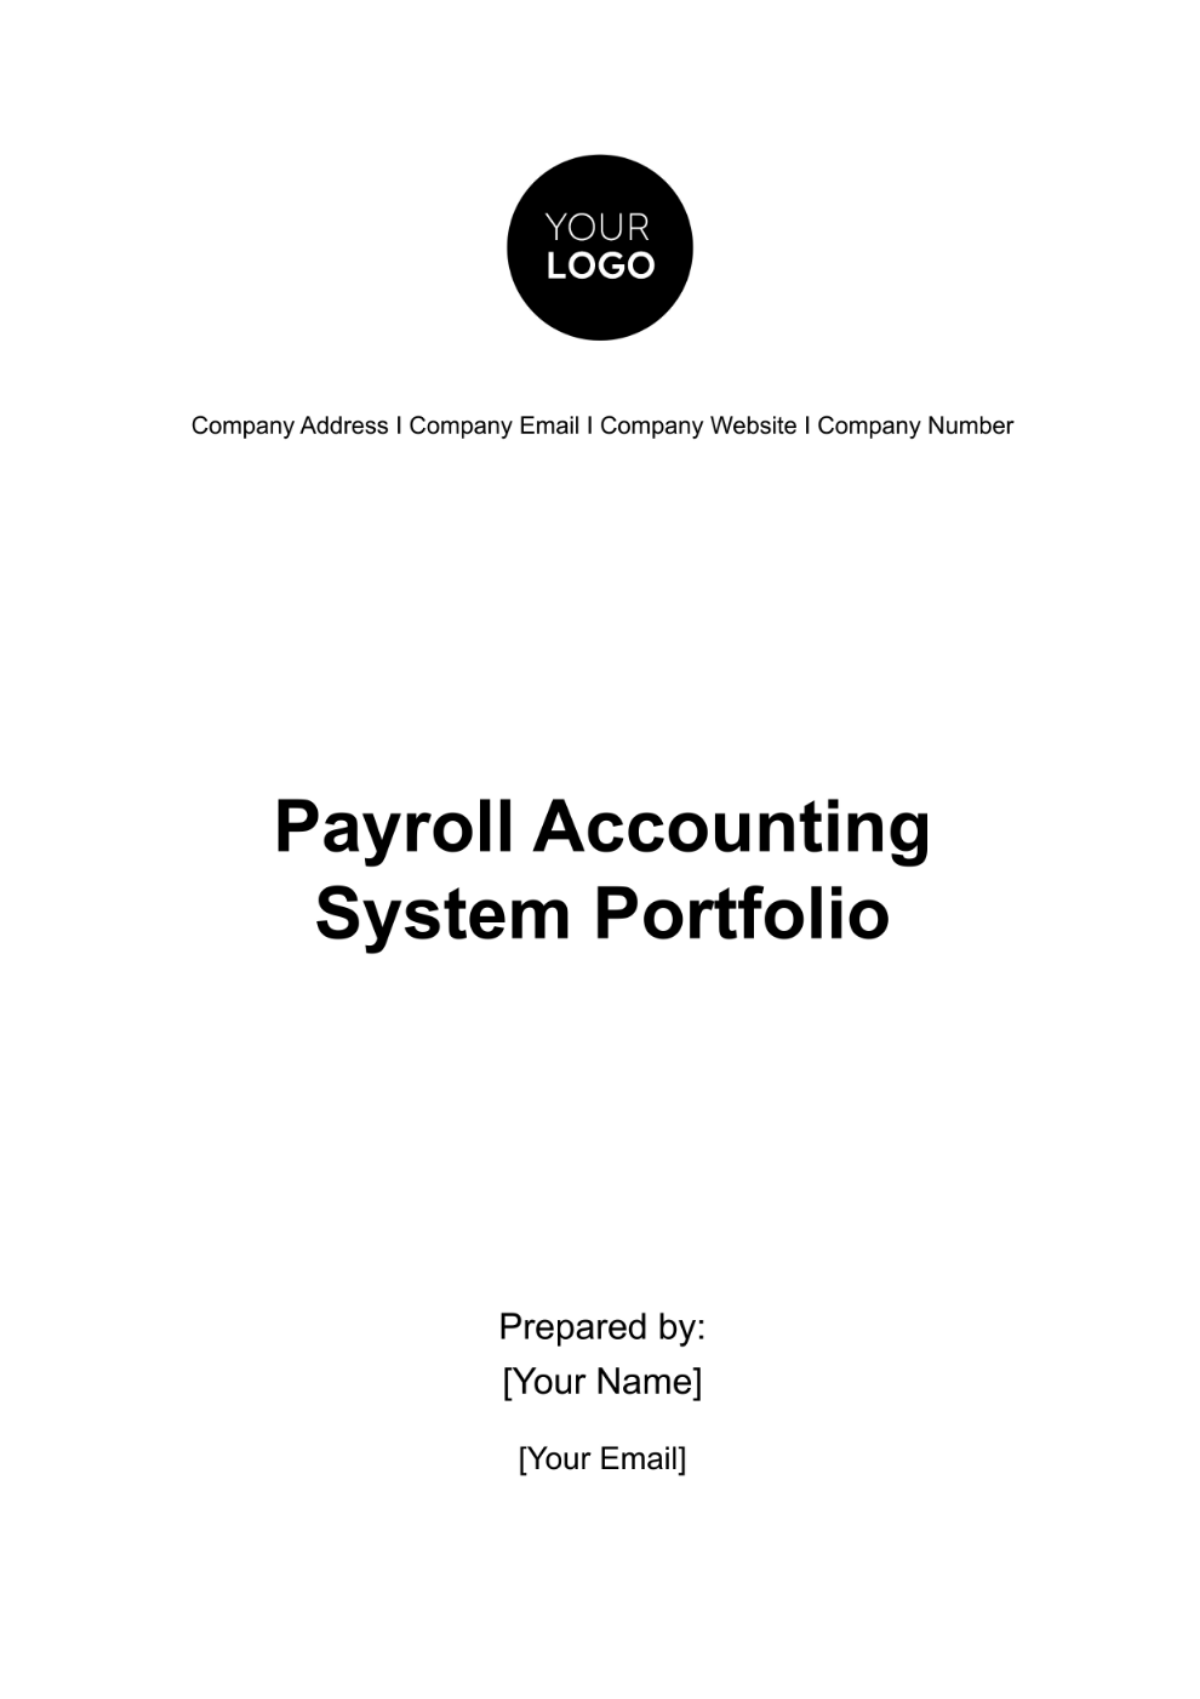 Free Payroll Accounting System Portfolio Template